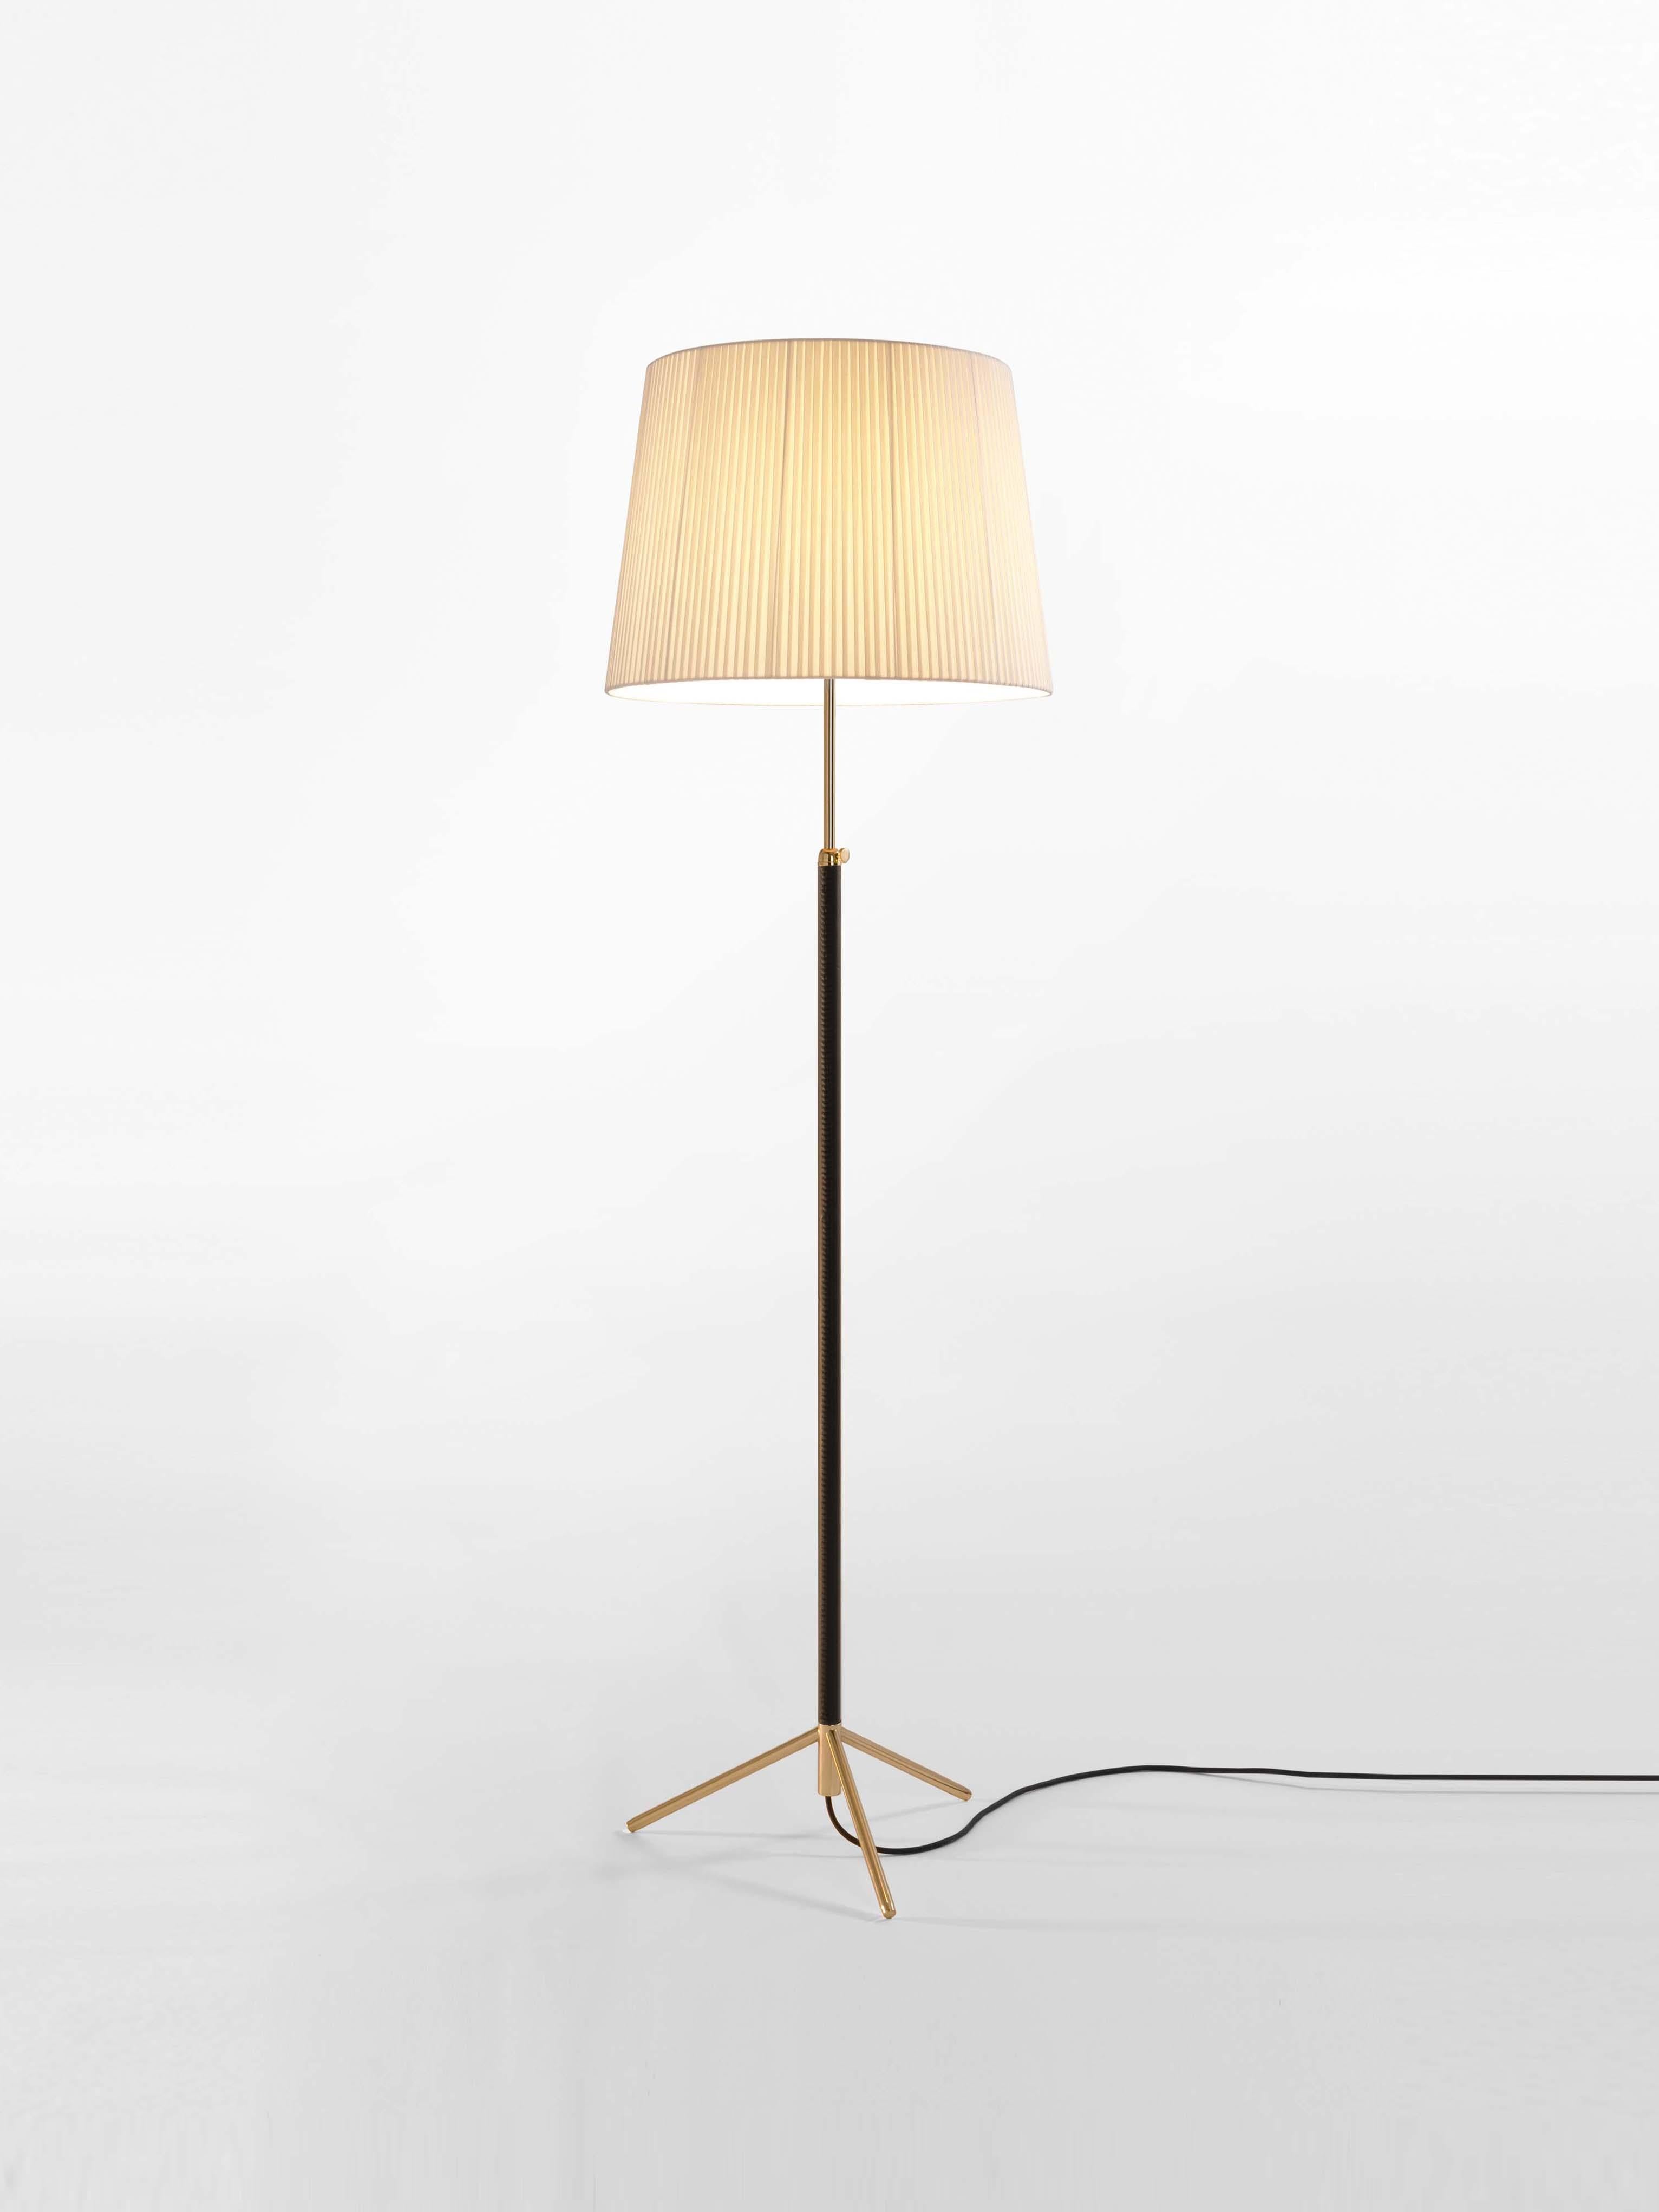 Natural and brass Pie de Salón G1 floor lamp by Jaume Sans
Dimensions: D 45 x H 120-160 cm
Materials: Metal, leather, ribbon.
Available in chrome-plated or polished brass structure.
Available in other shade colors and sizes.

This slender